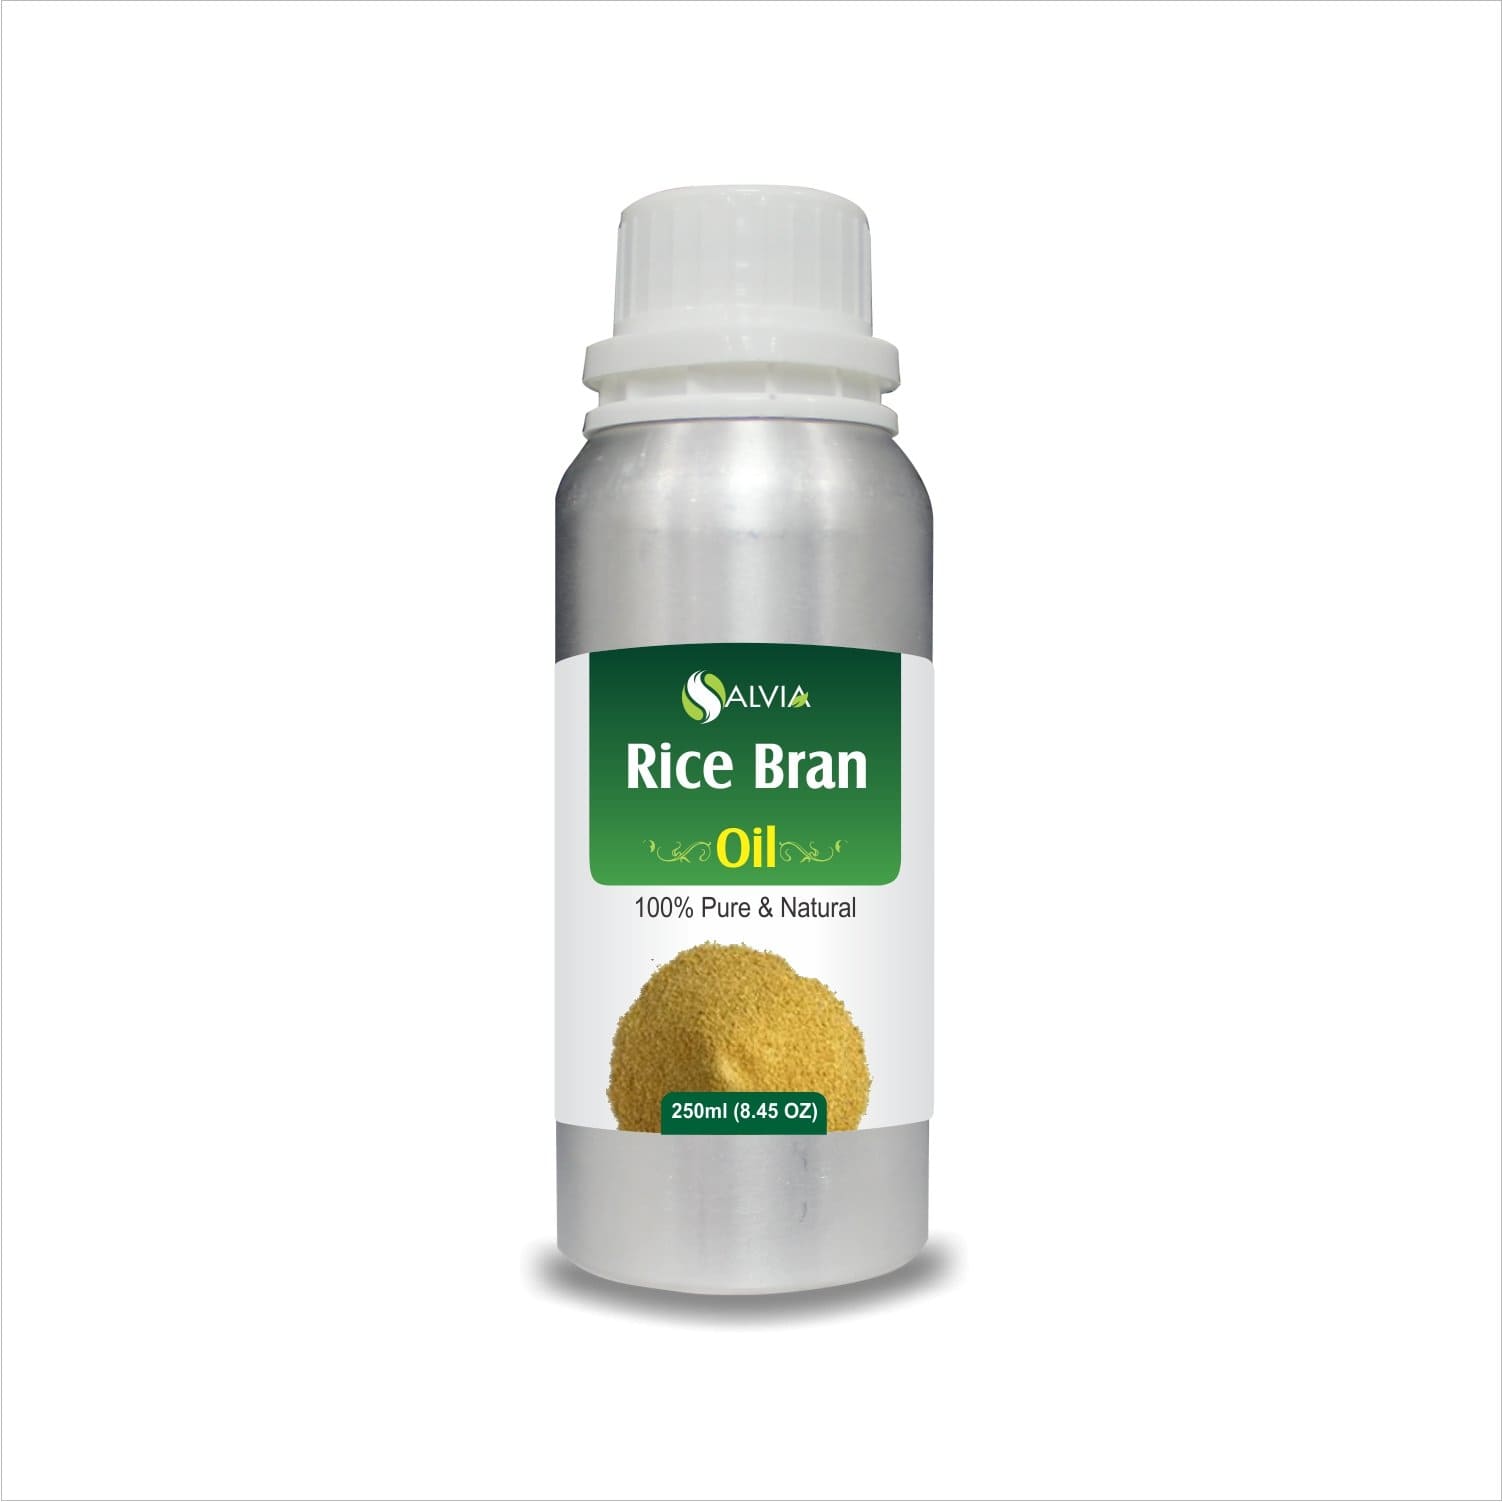 rice bran oil made from